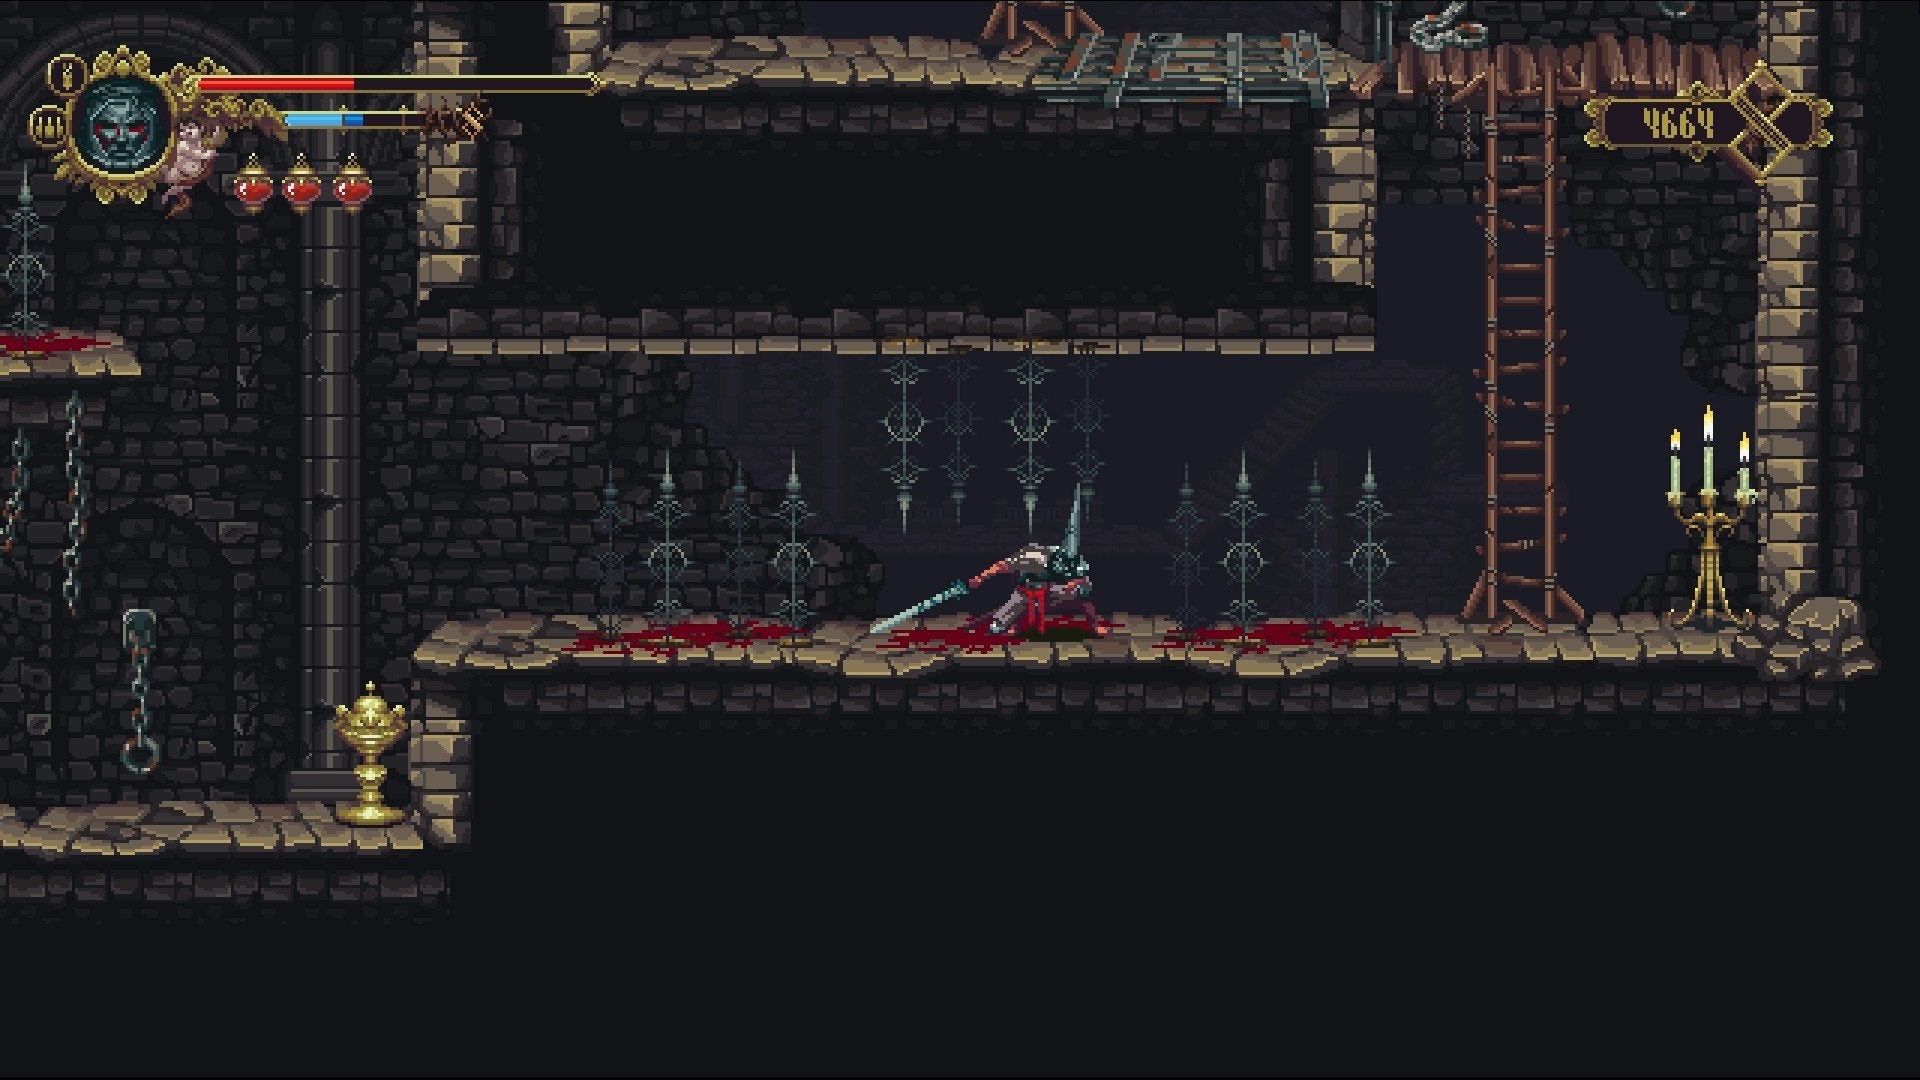 The player ducking under spikes in a narrow hallway in Blasphemous.